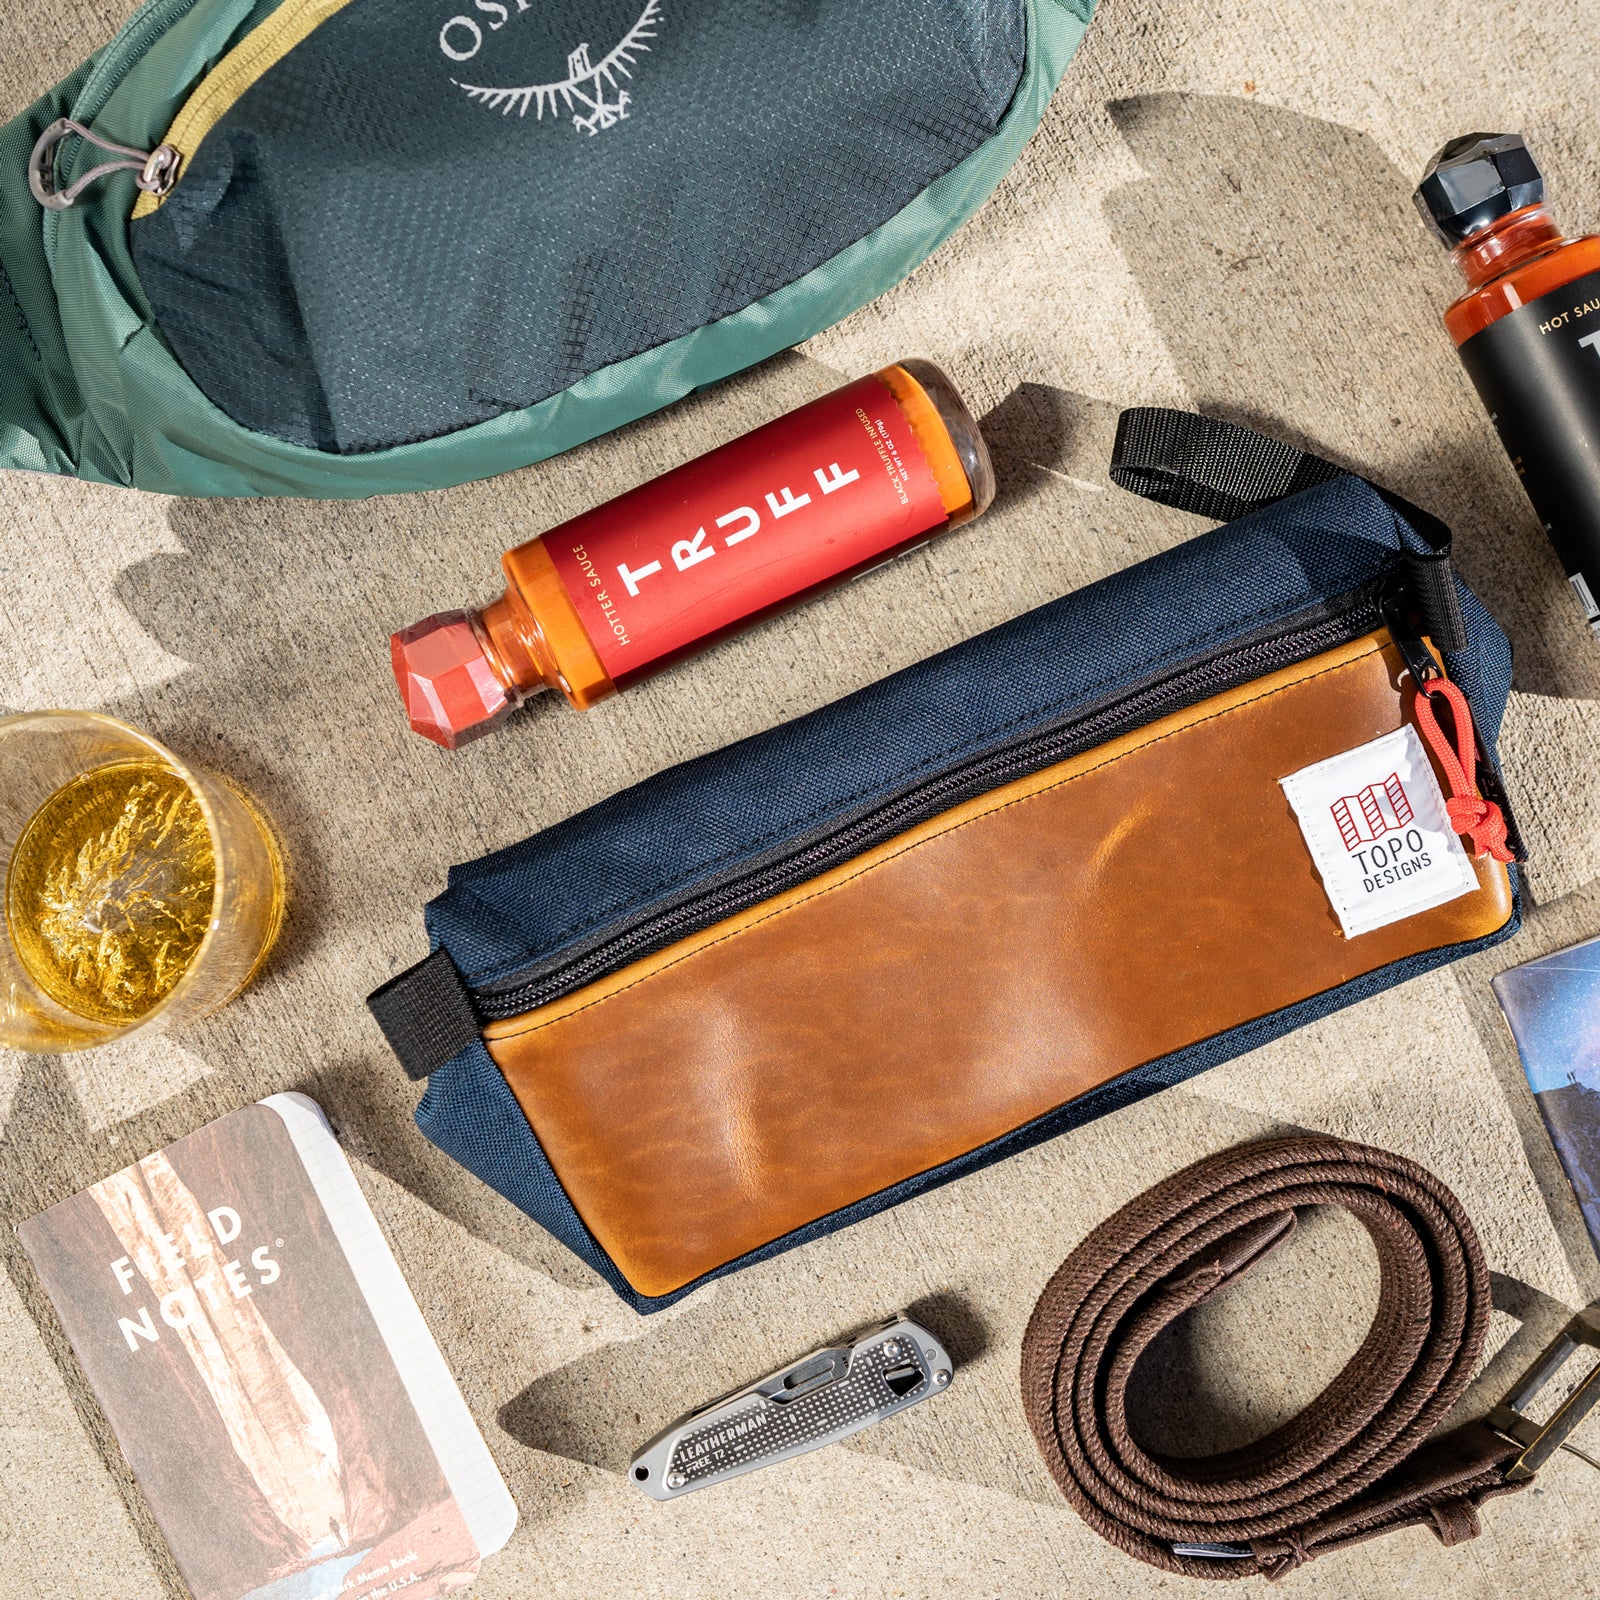 Less Is More: 16 Awesome Outdoor Gifts Under $50